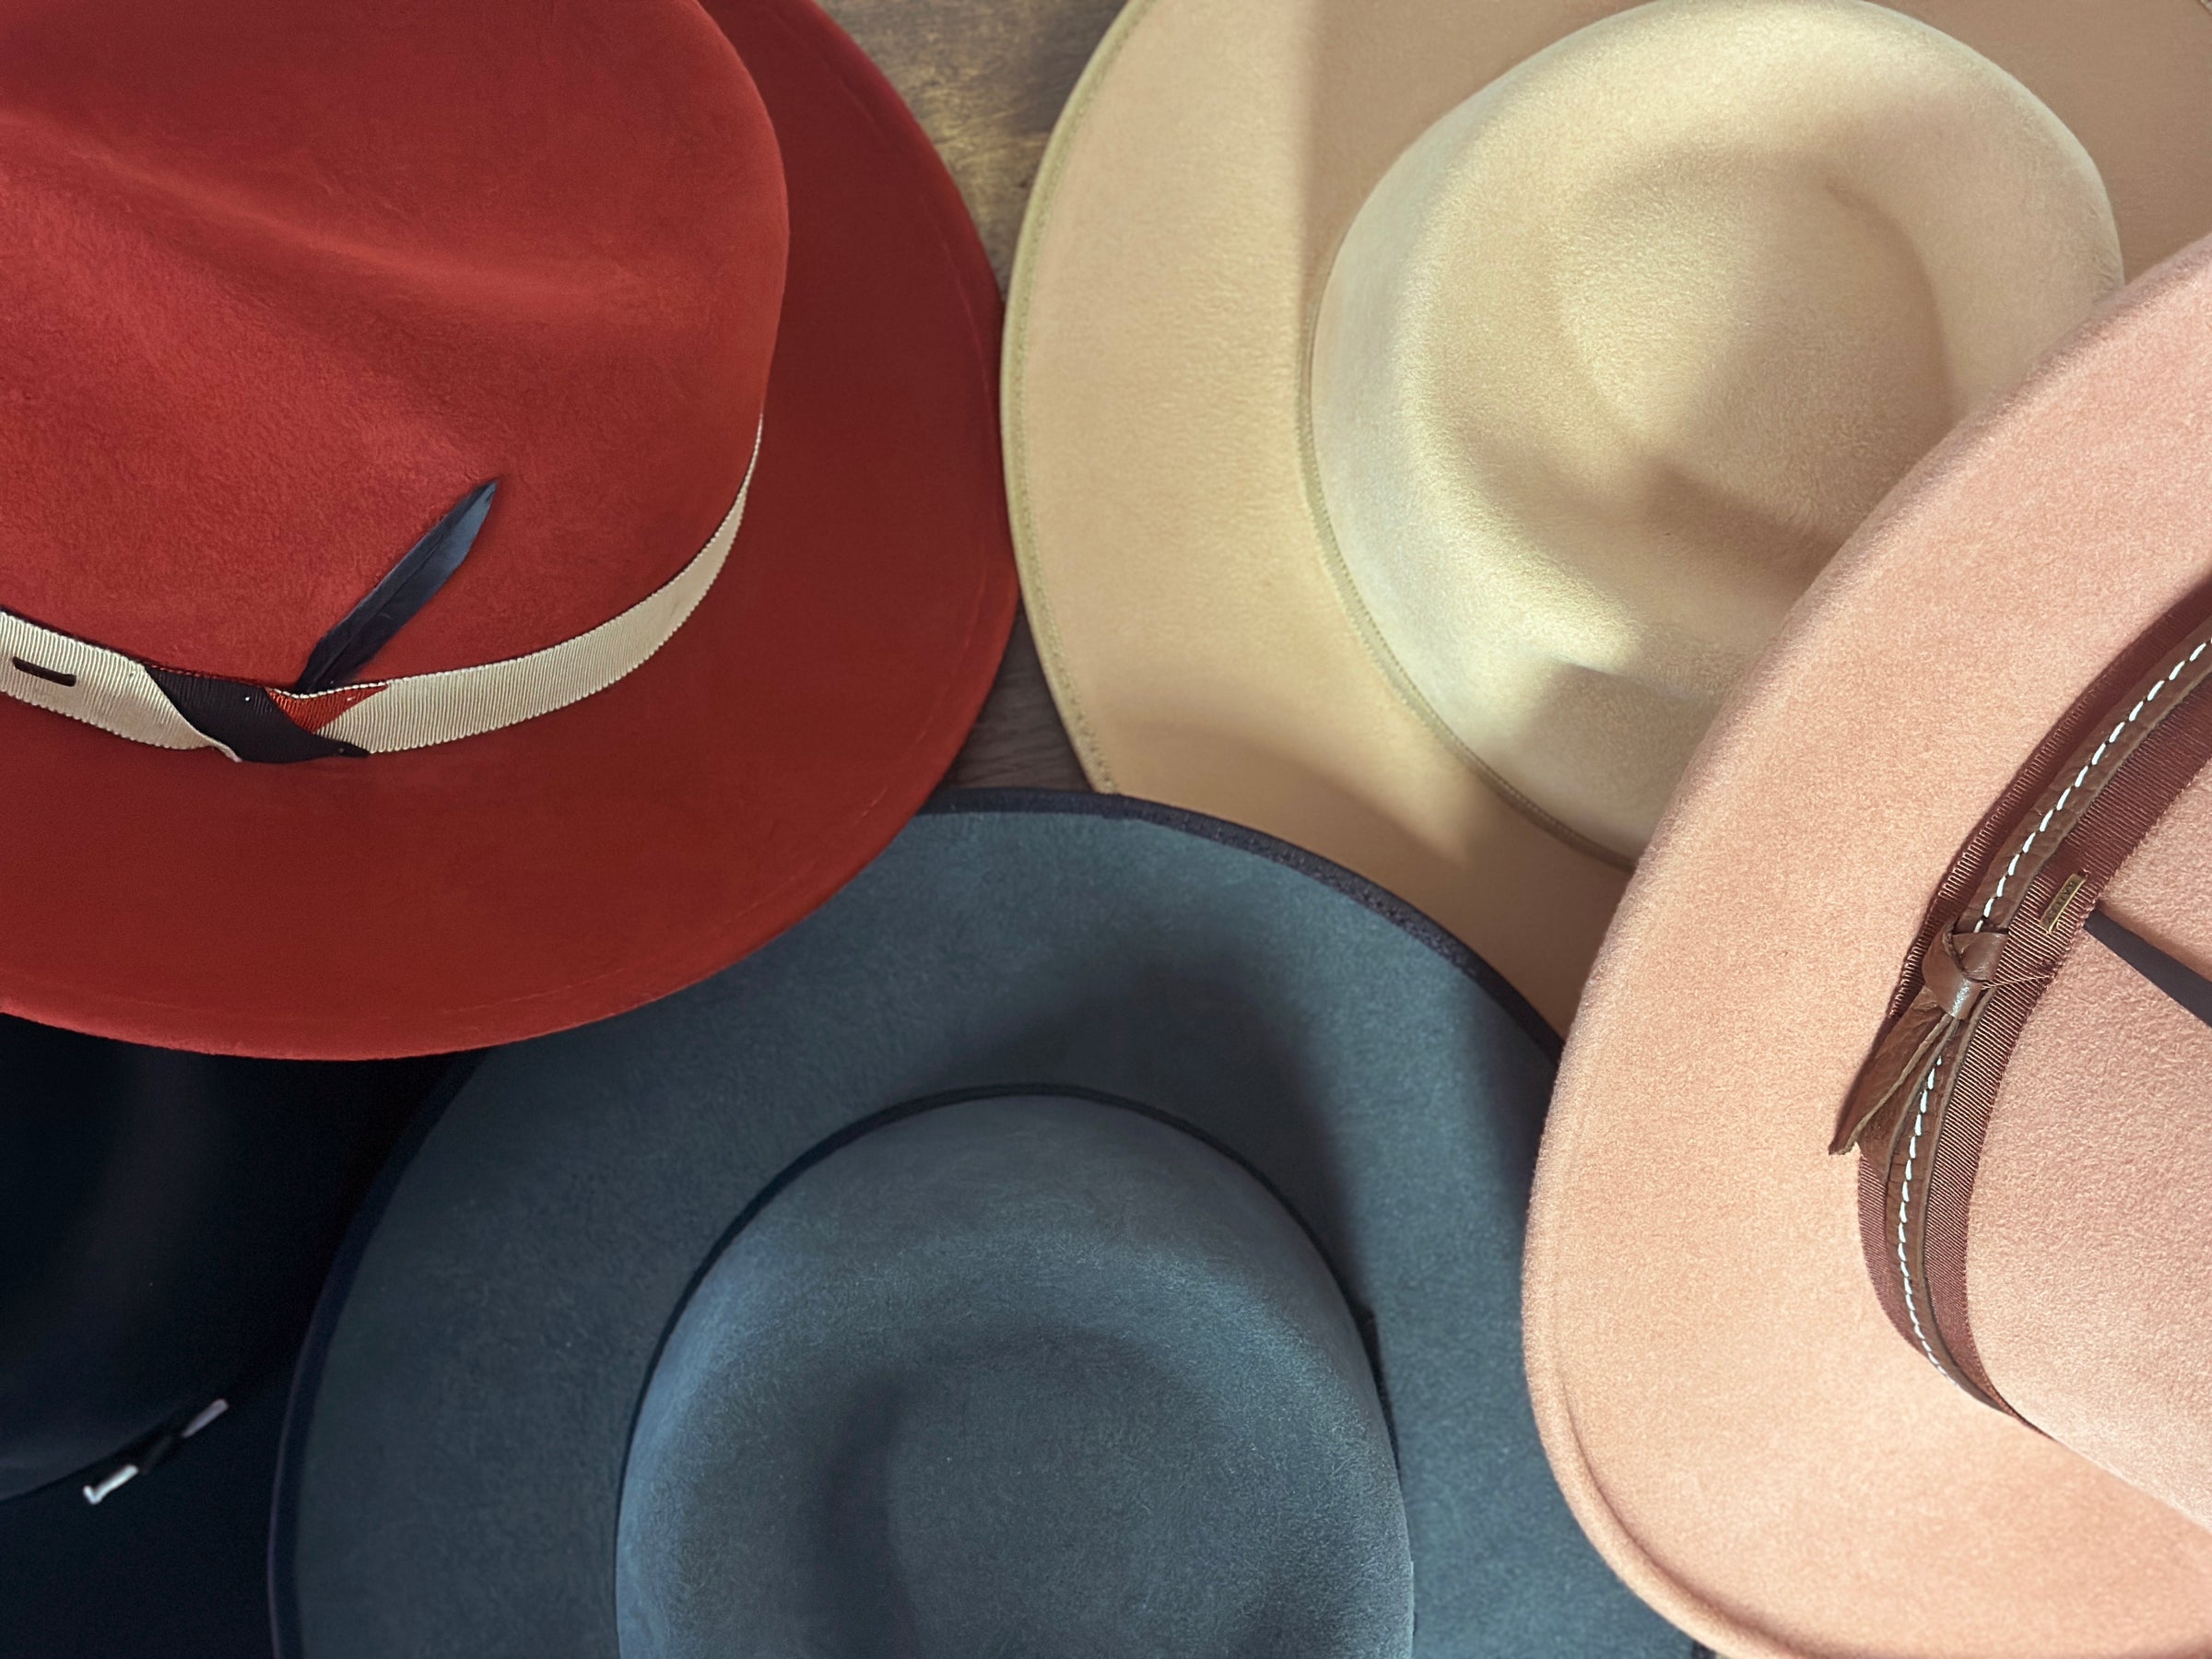 Bailey 1922 hats in assorted colors